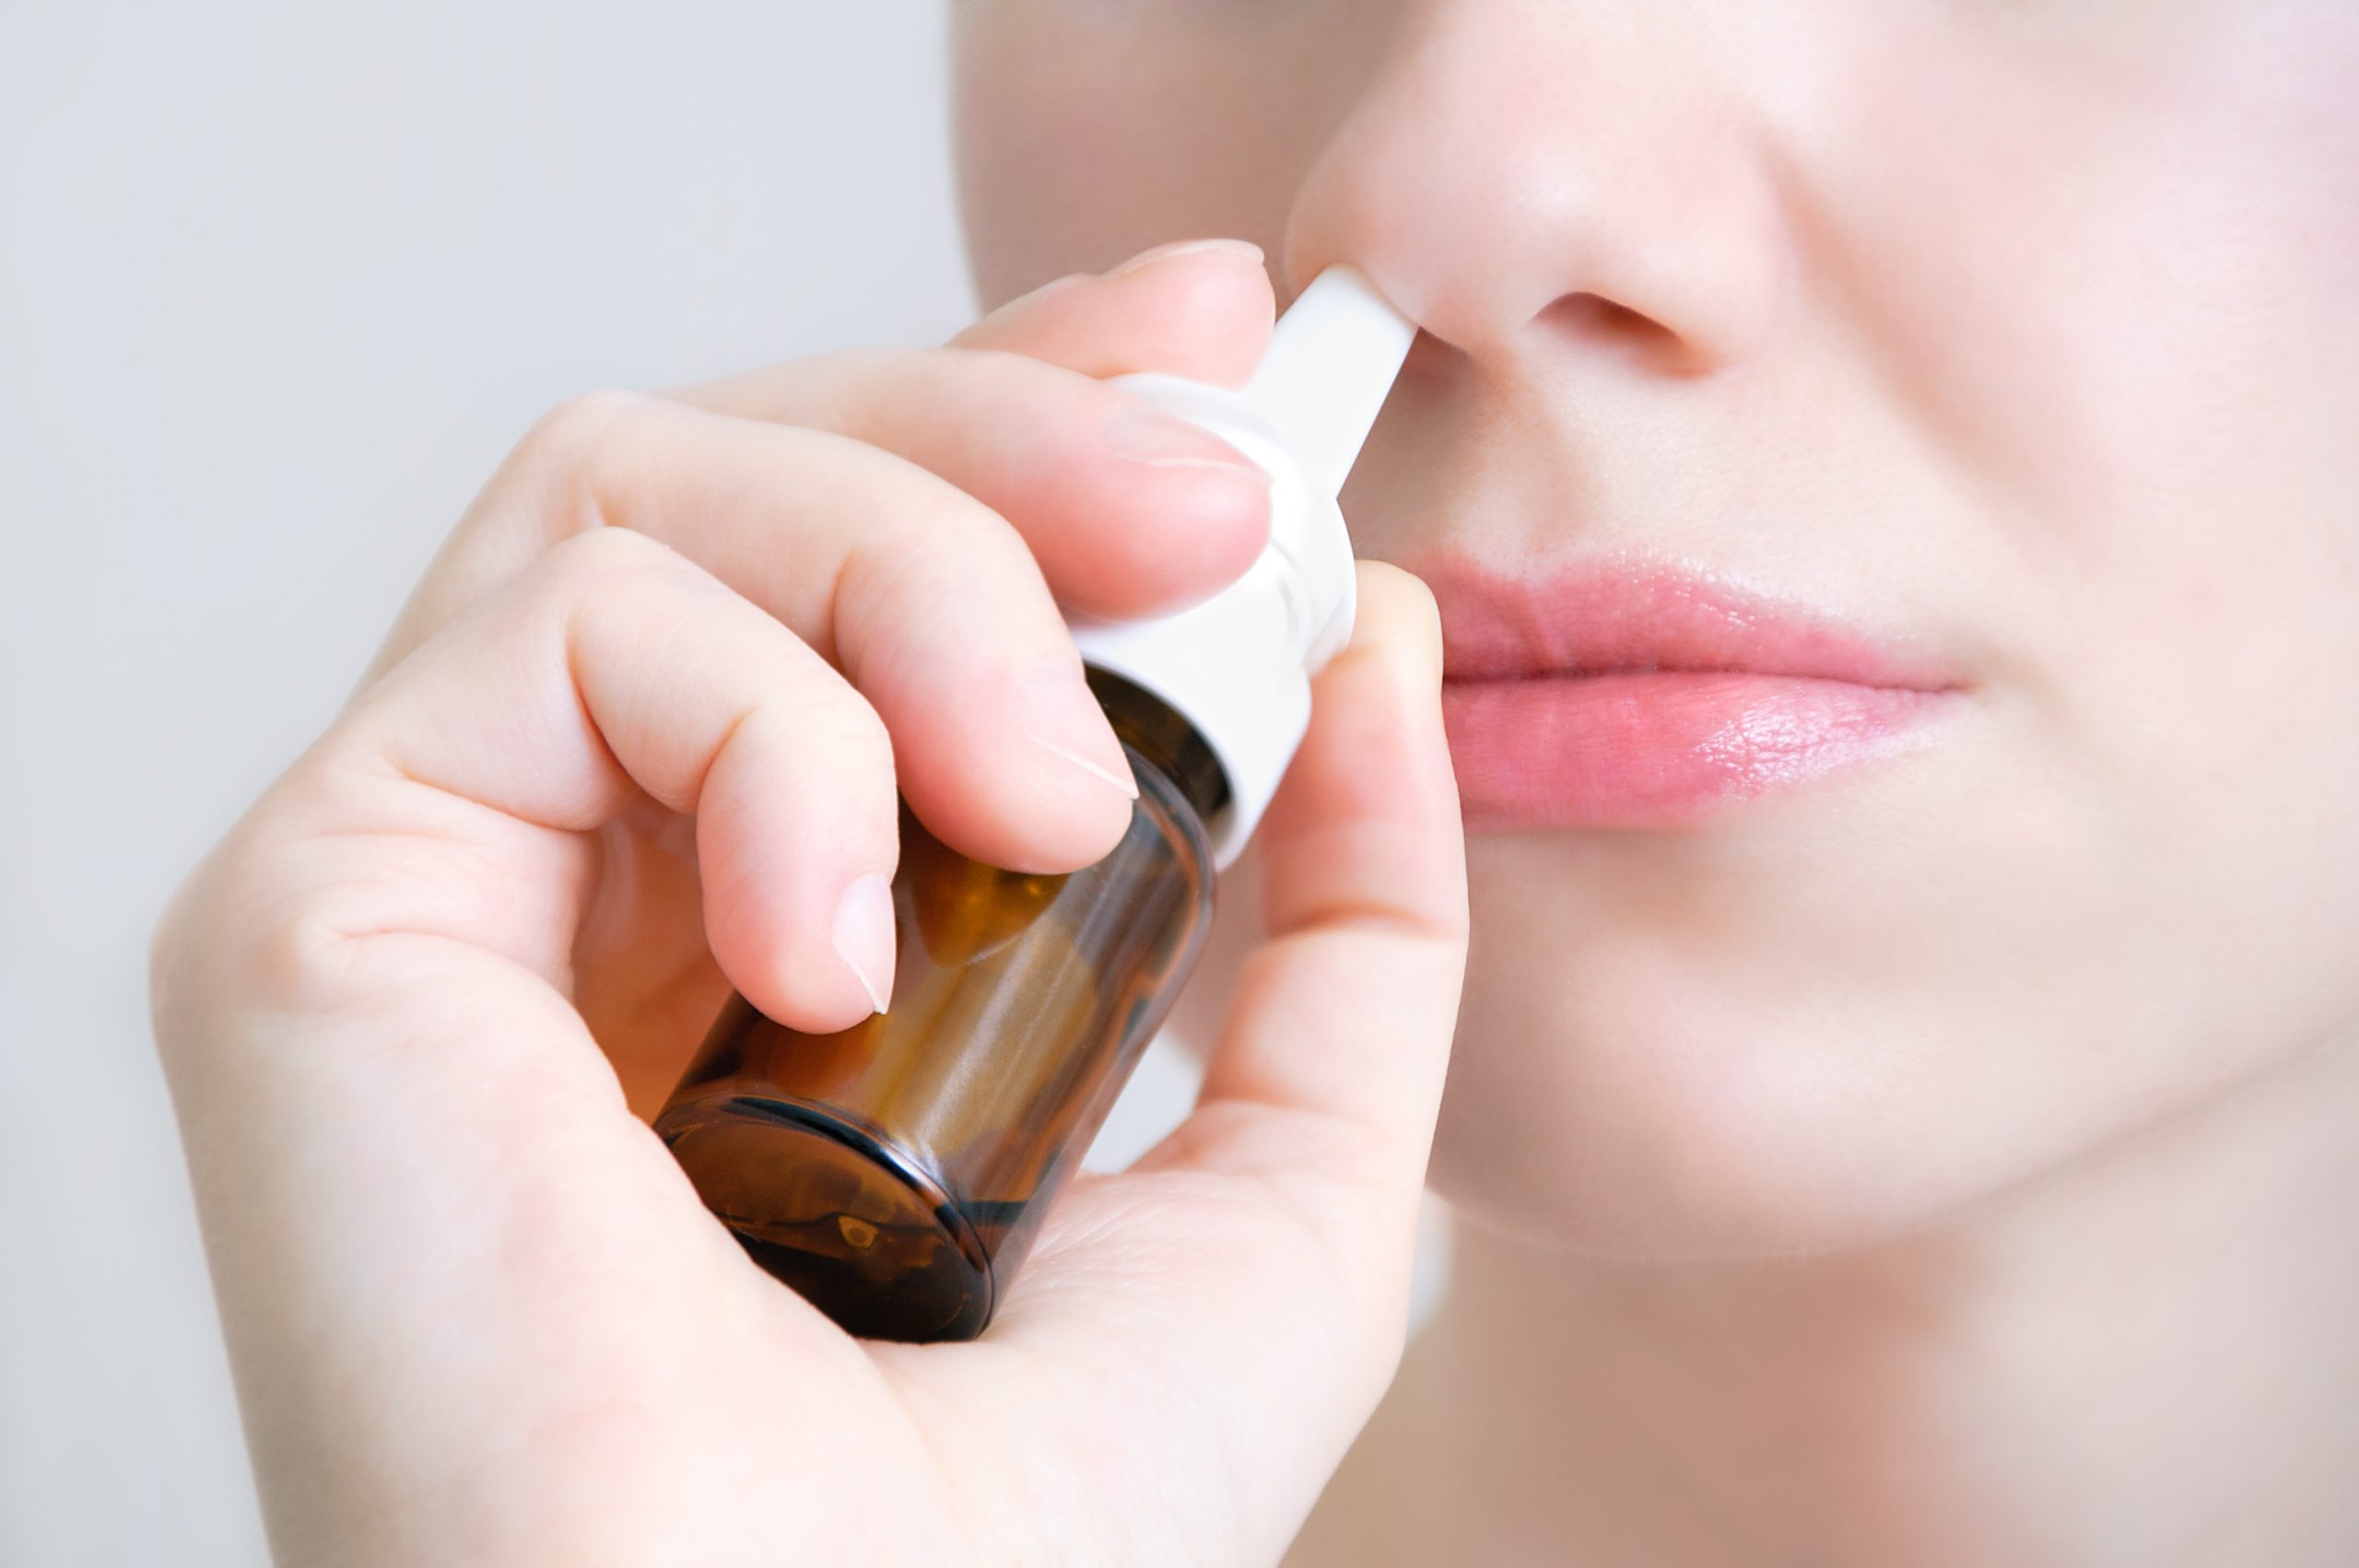 The nasal spray reduces the risk of developing infections - a healing practice